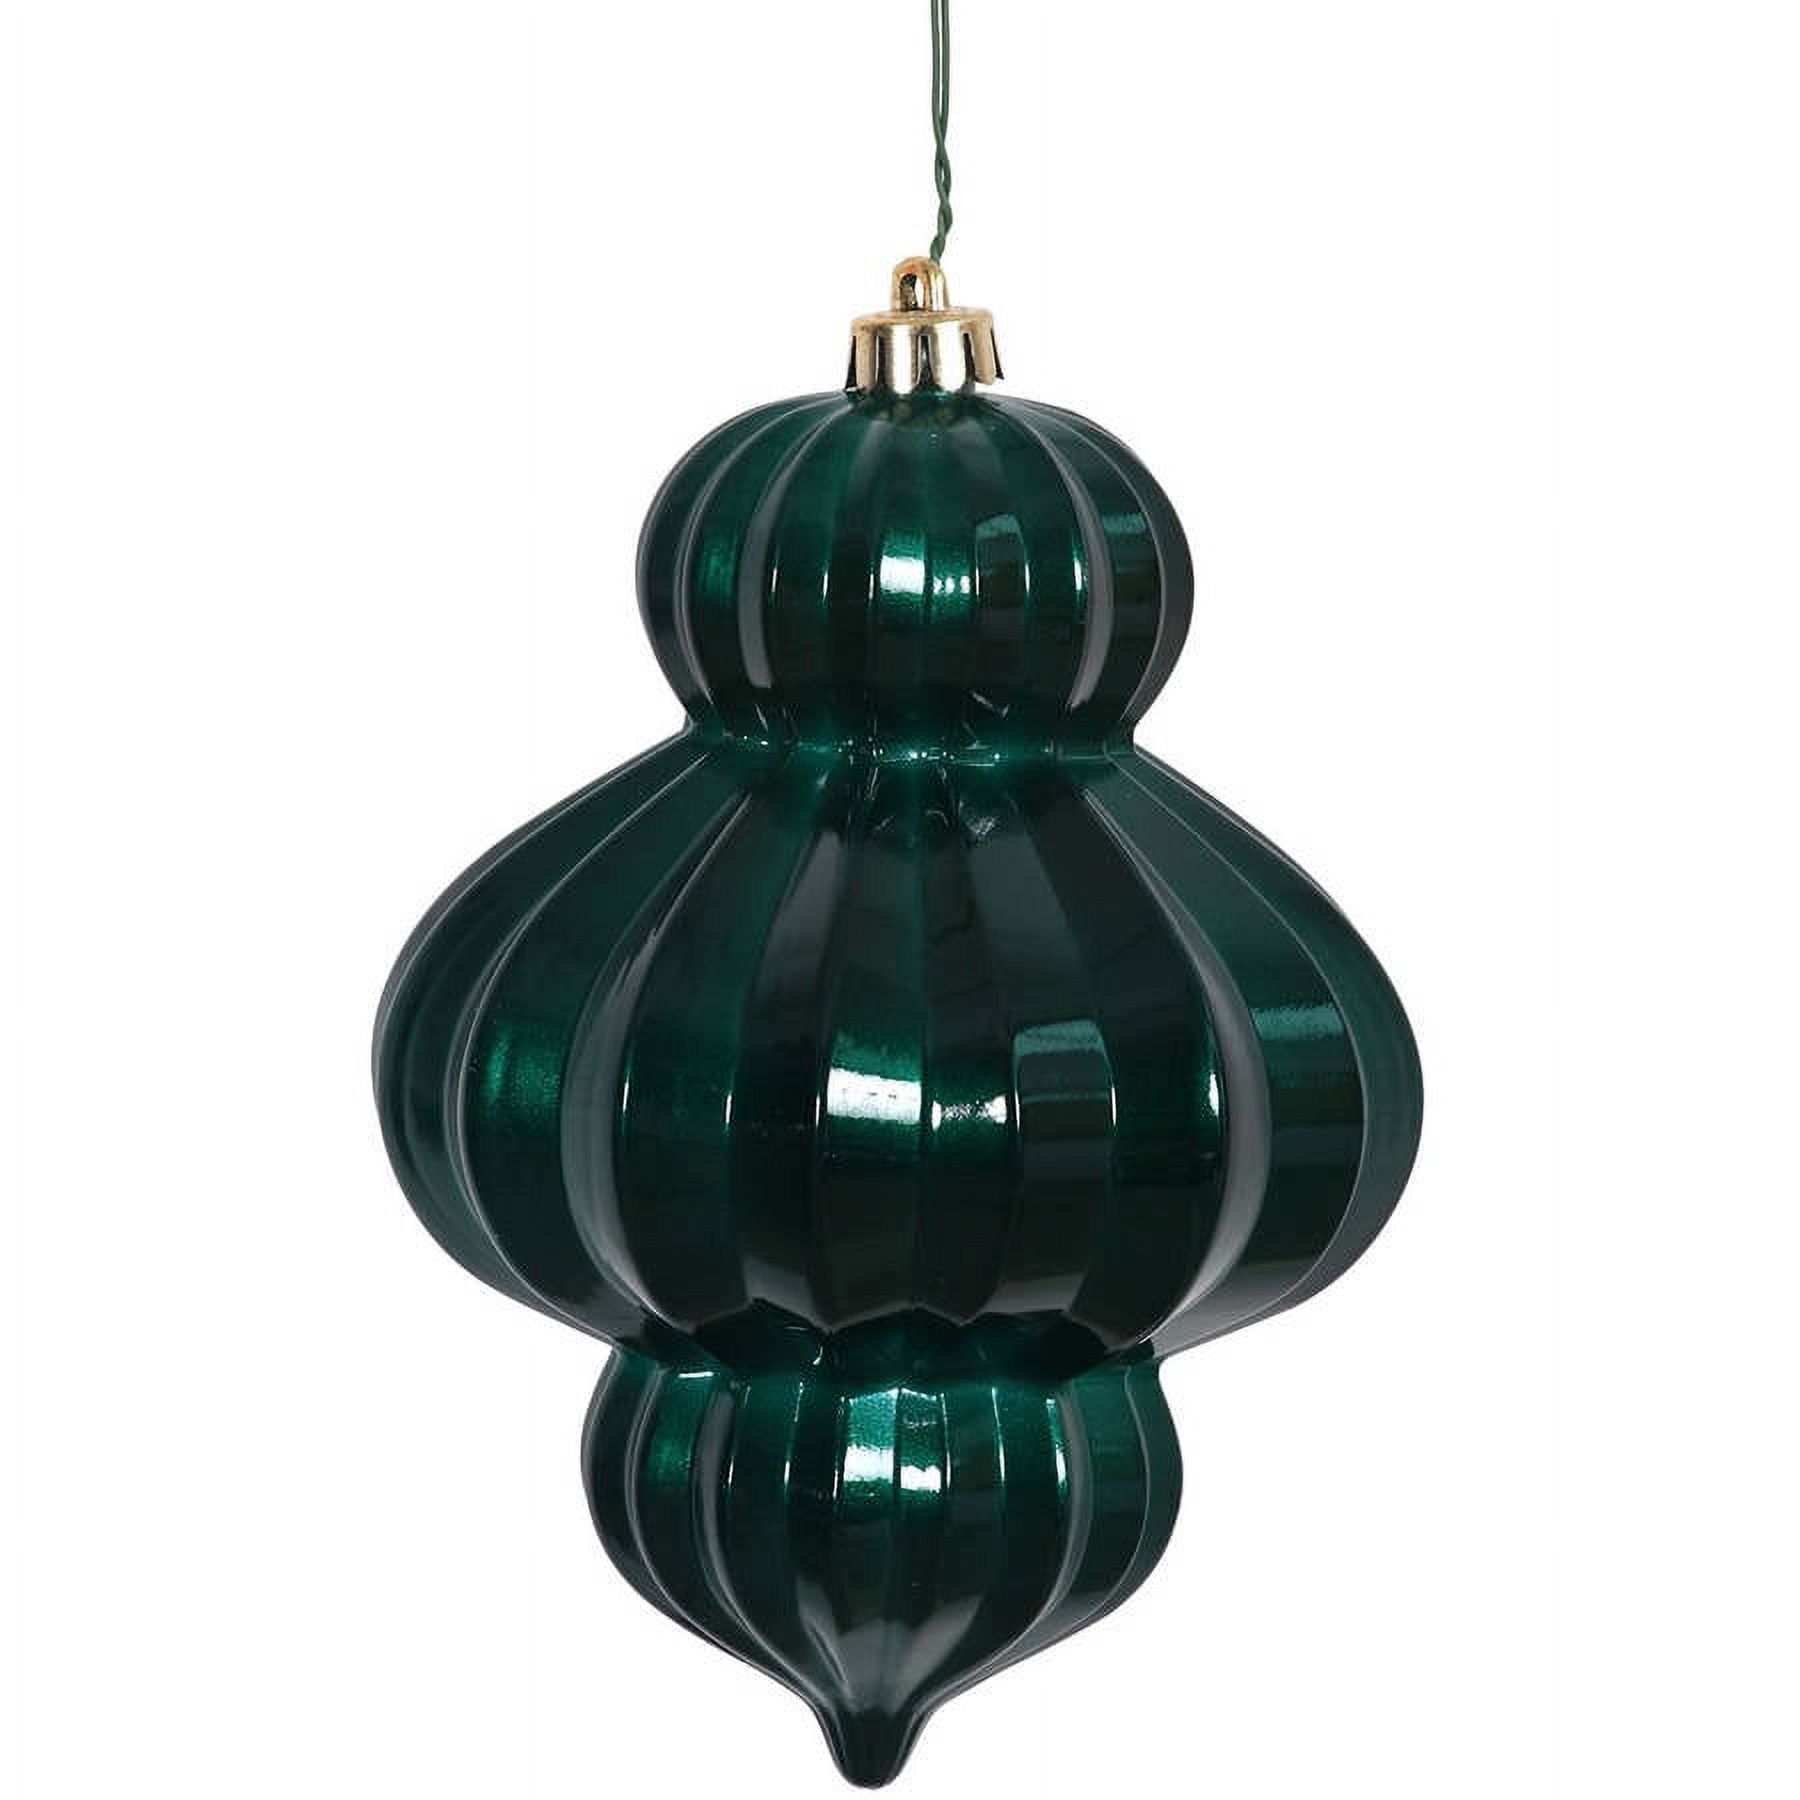 Vickerman 6" Teal Candy Lantern with UV-Resistant Finish and Pre-Drilled Cap, Set of 3 - image 1 of 2